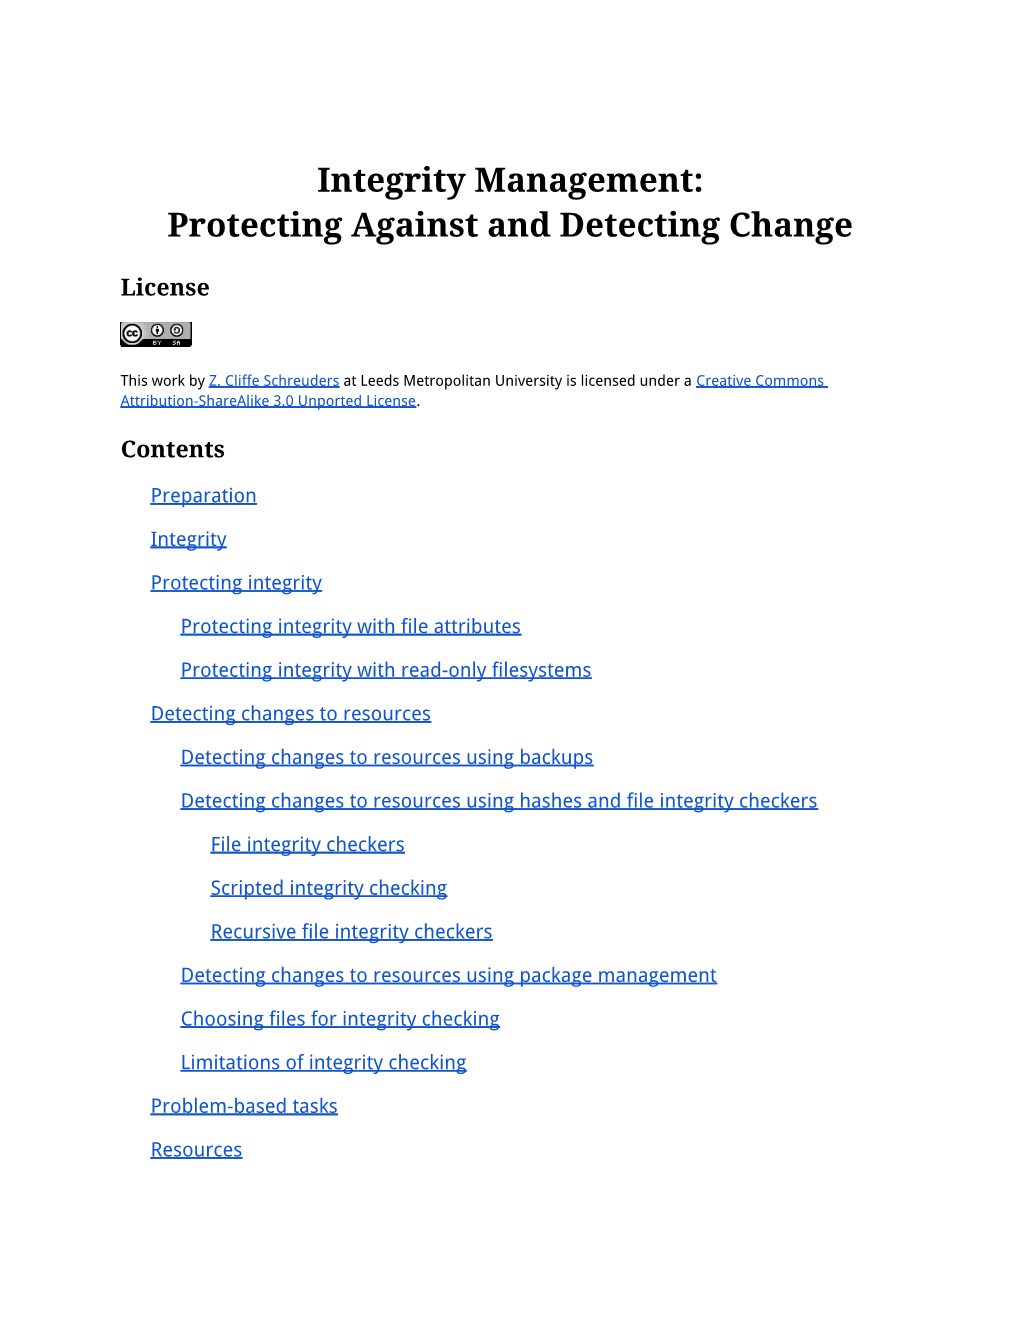 Integrity Management: Protecting Against and Detecting Change